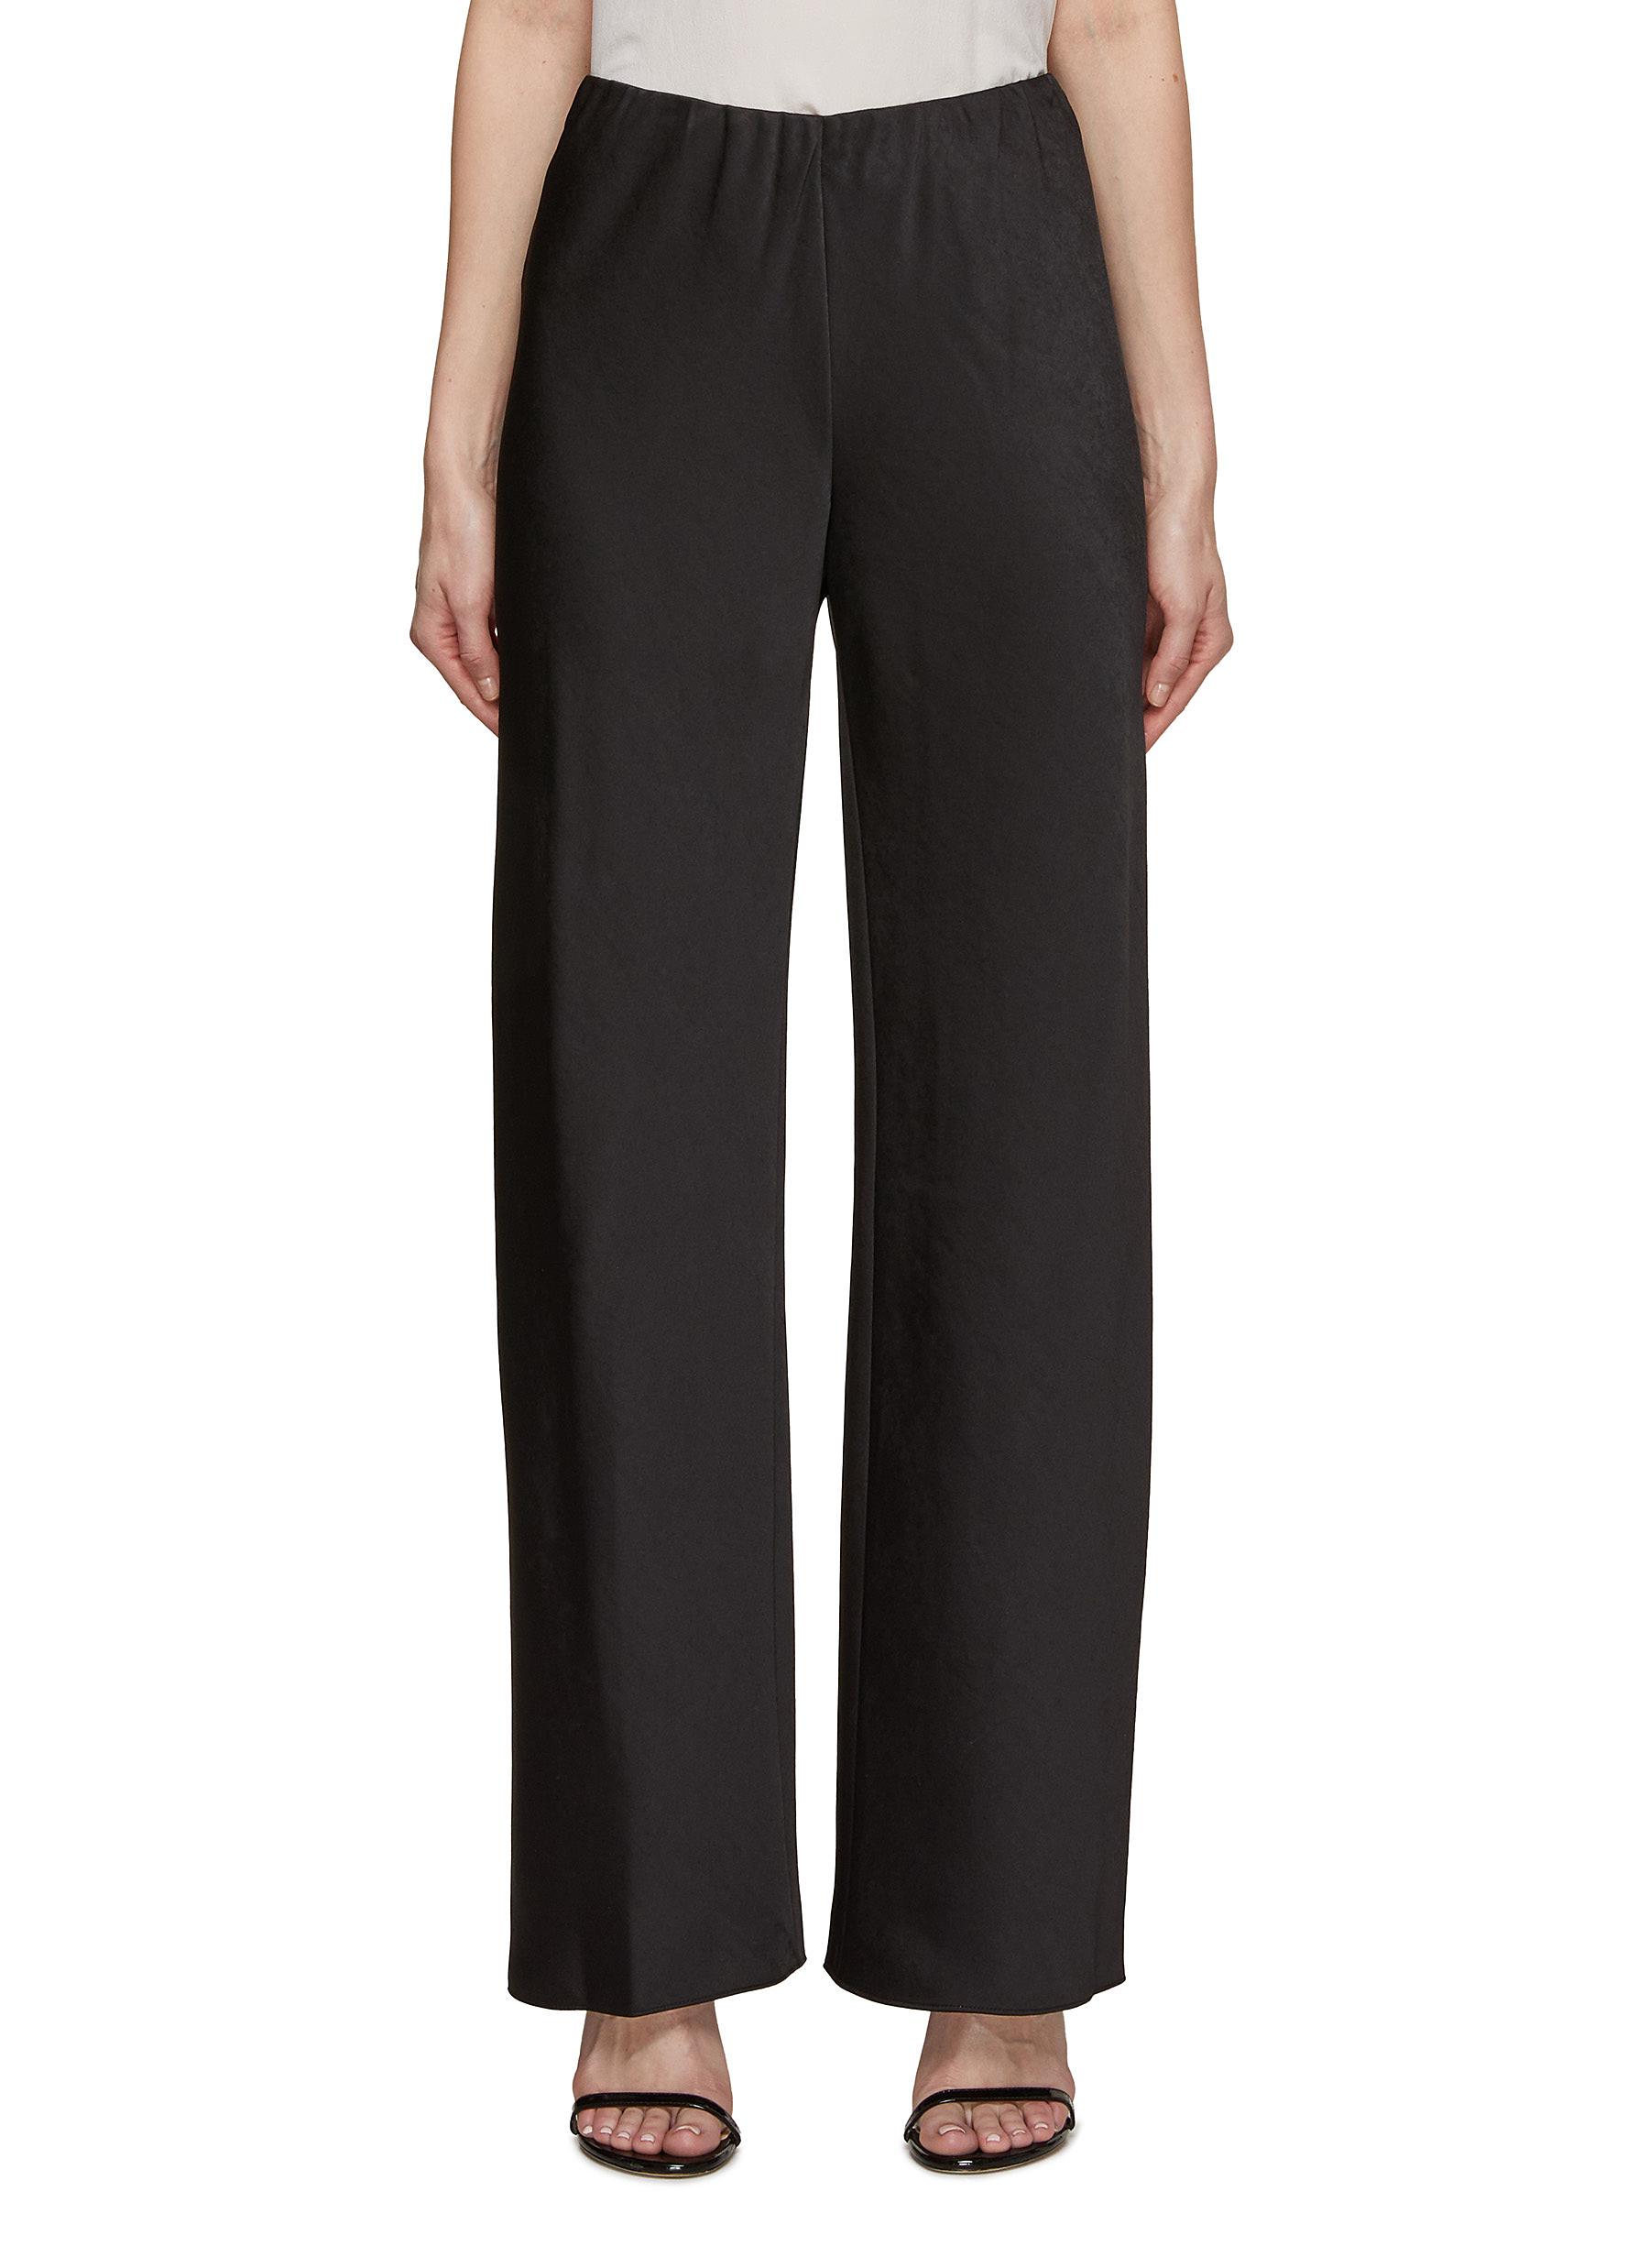 Stitch Front Seamed Pants